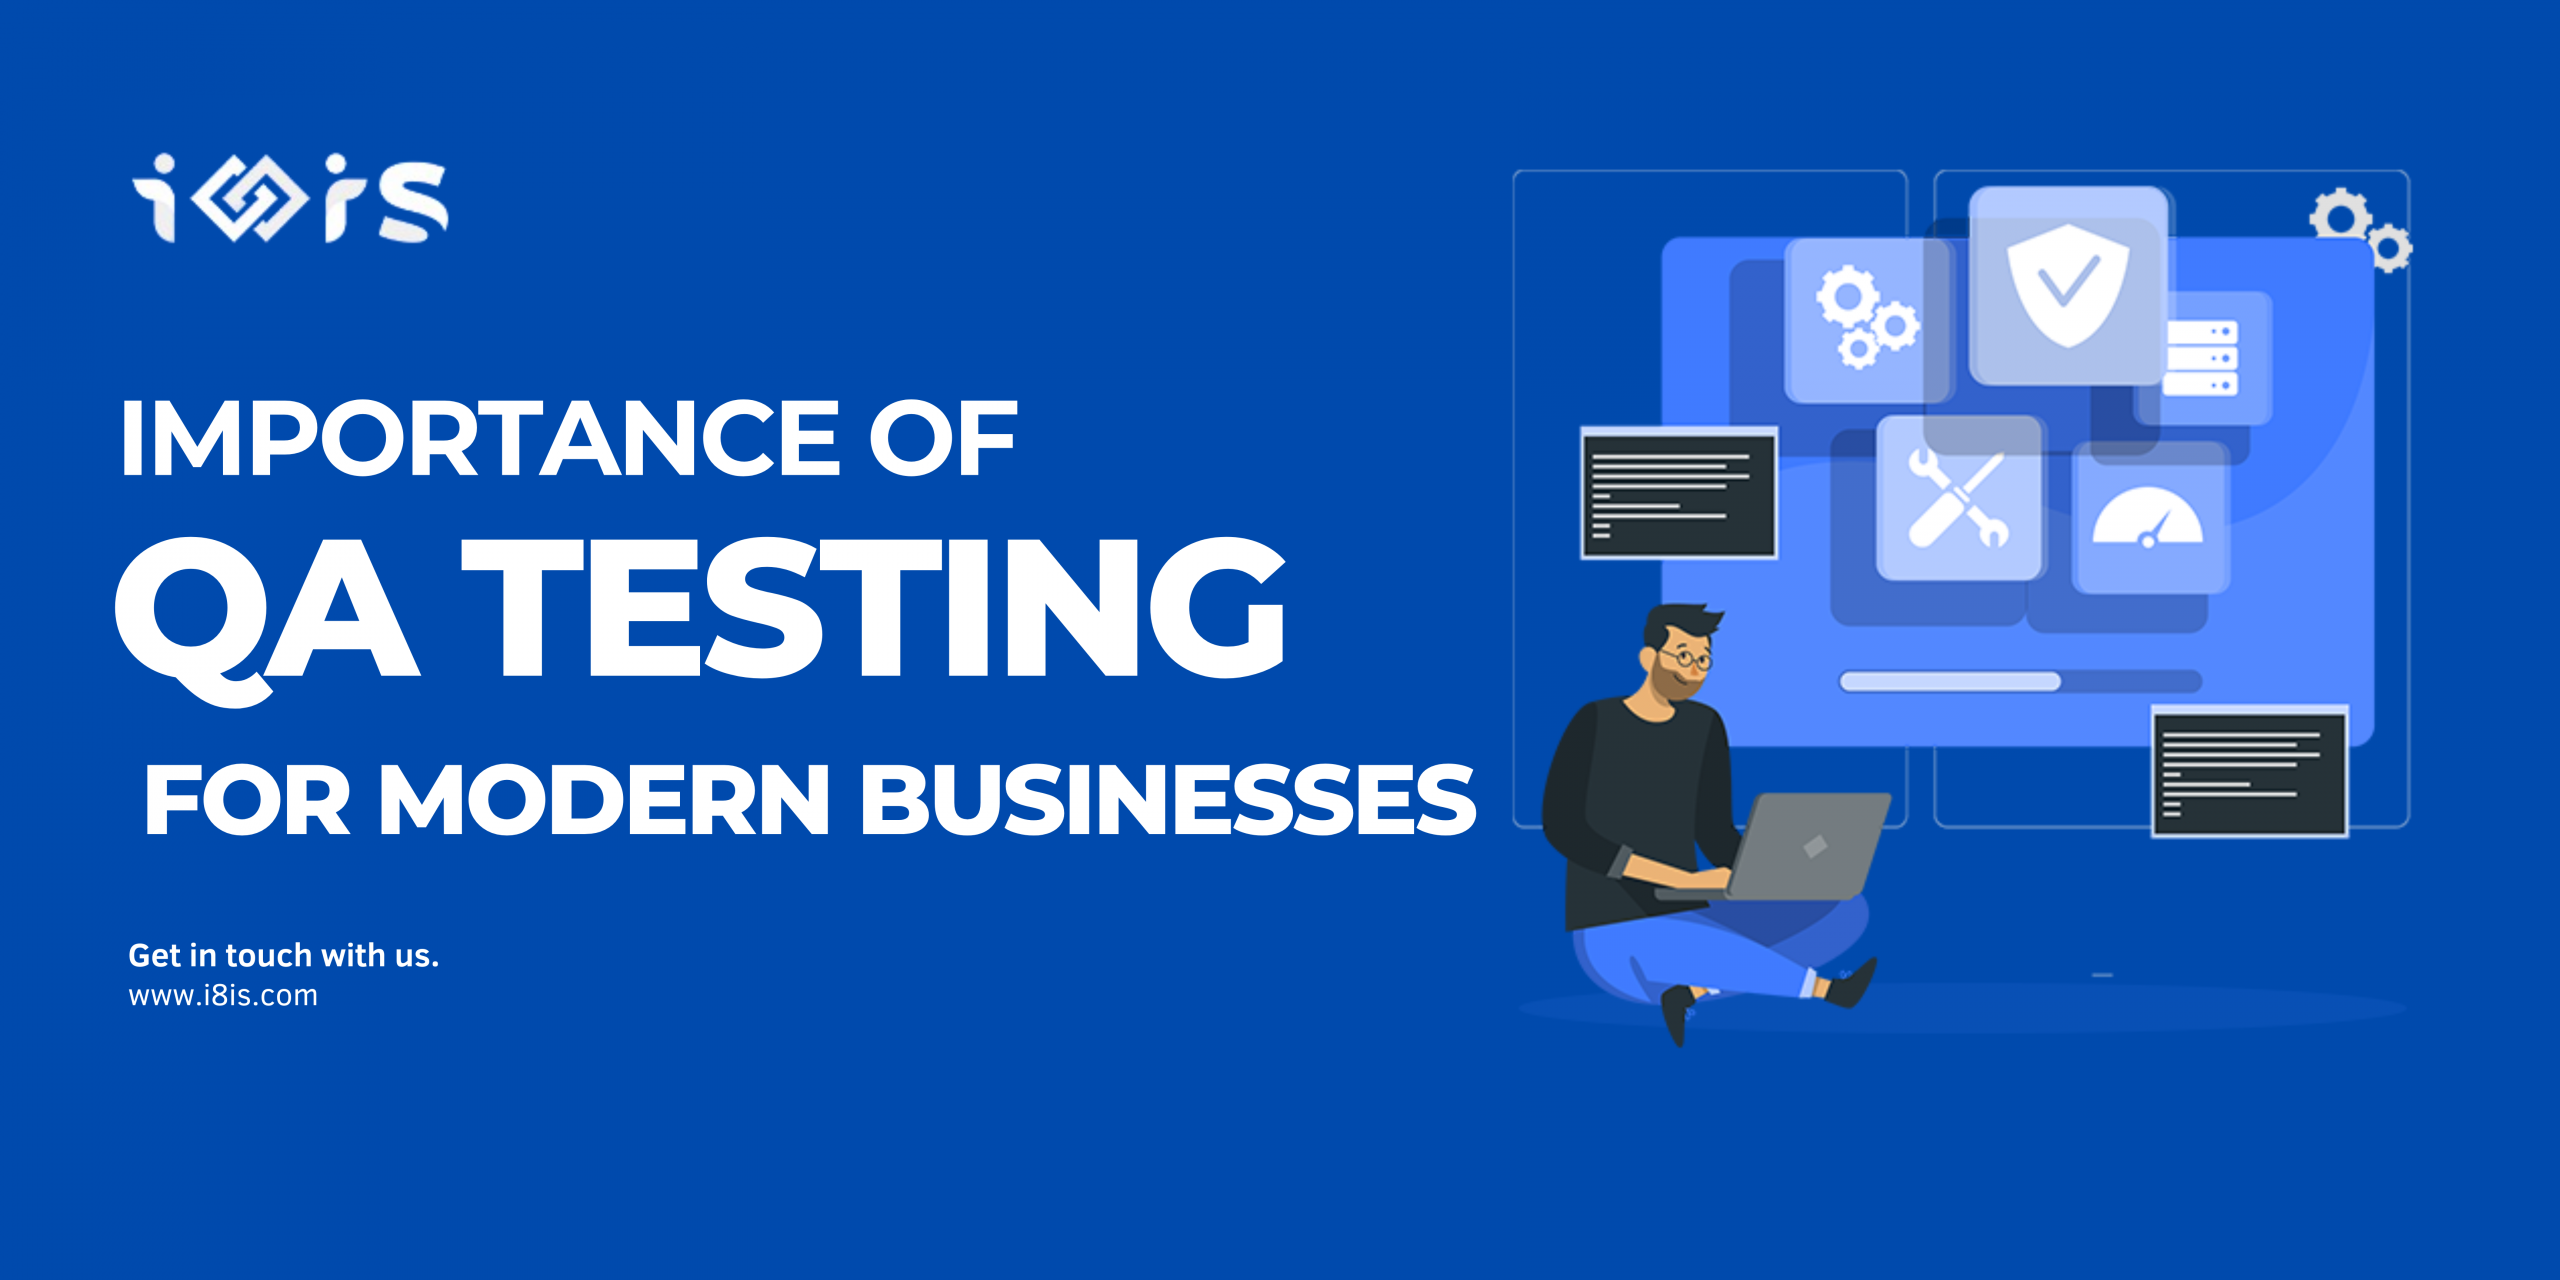 Revolutionize Your Business with QA Testing